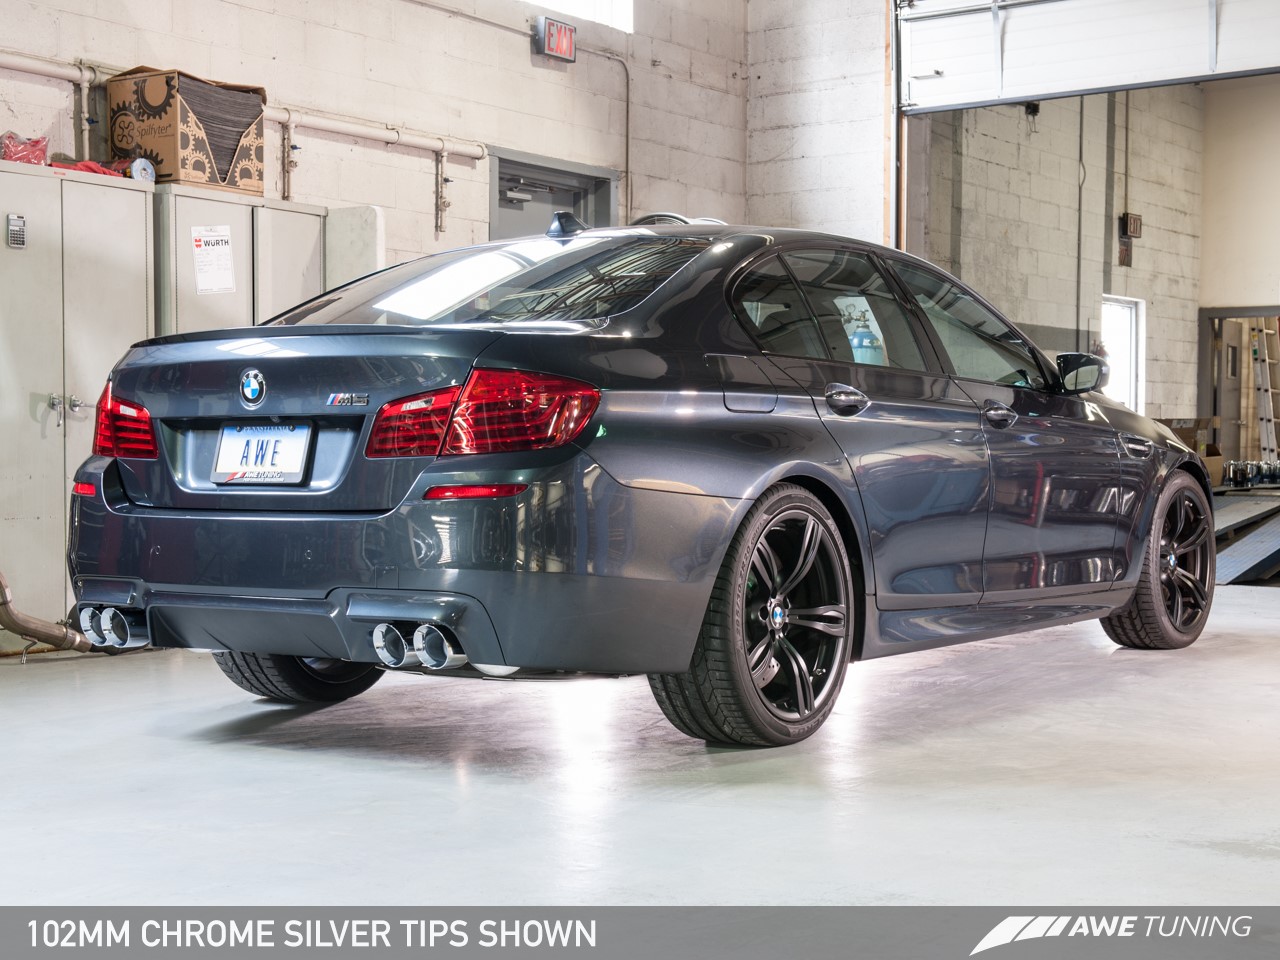 A rear view of a gray BMW M5 parked in a garage.